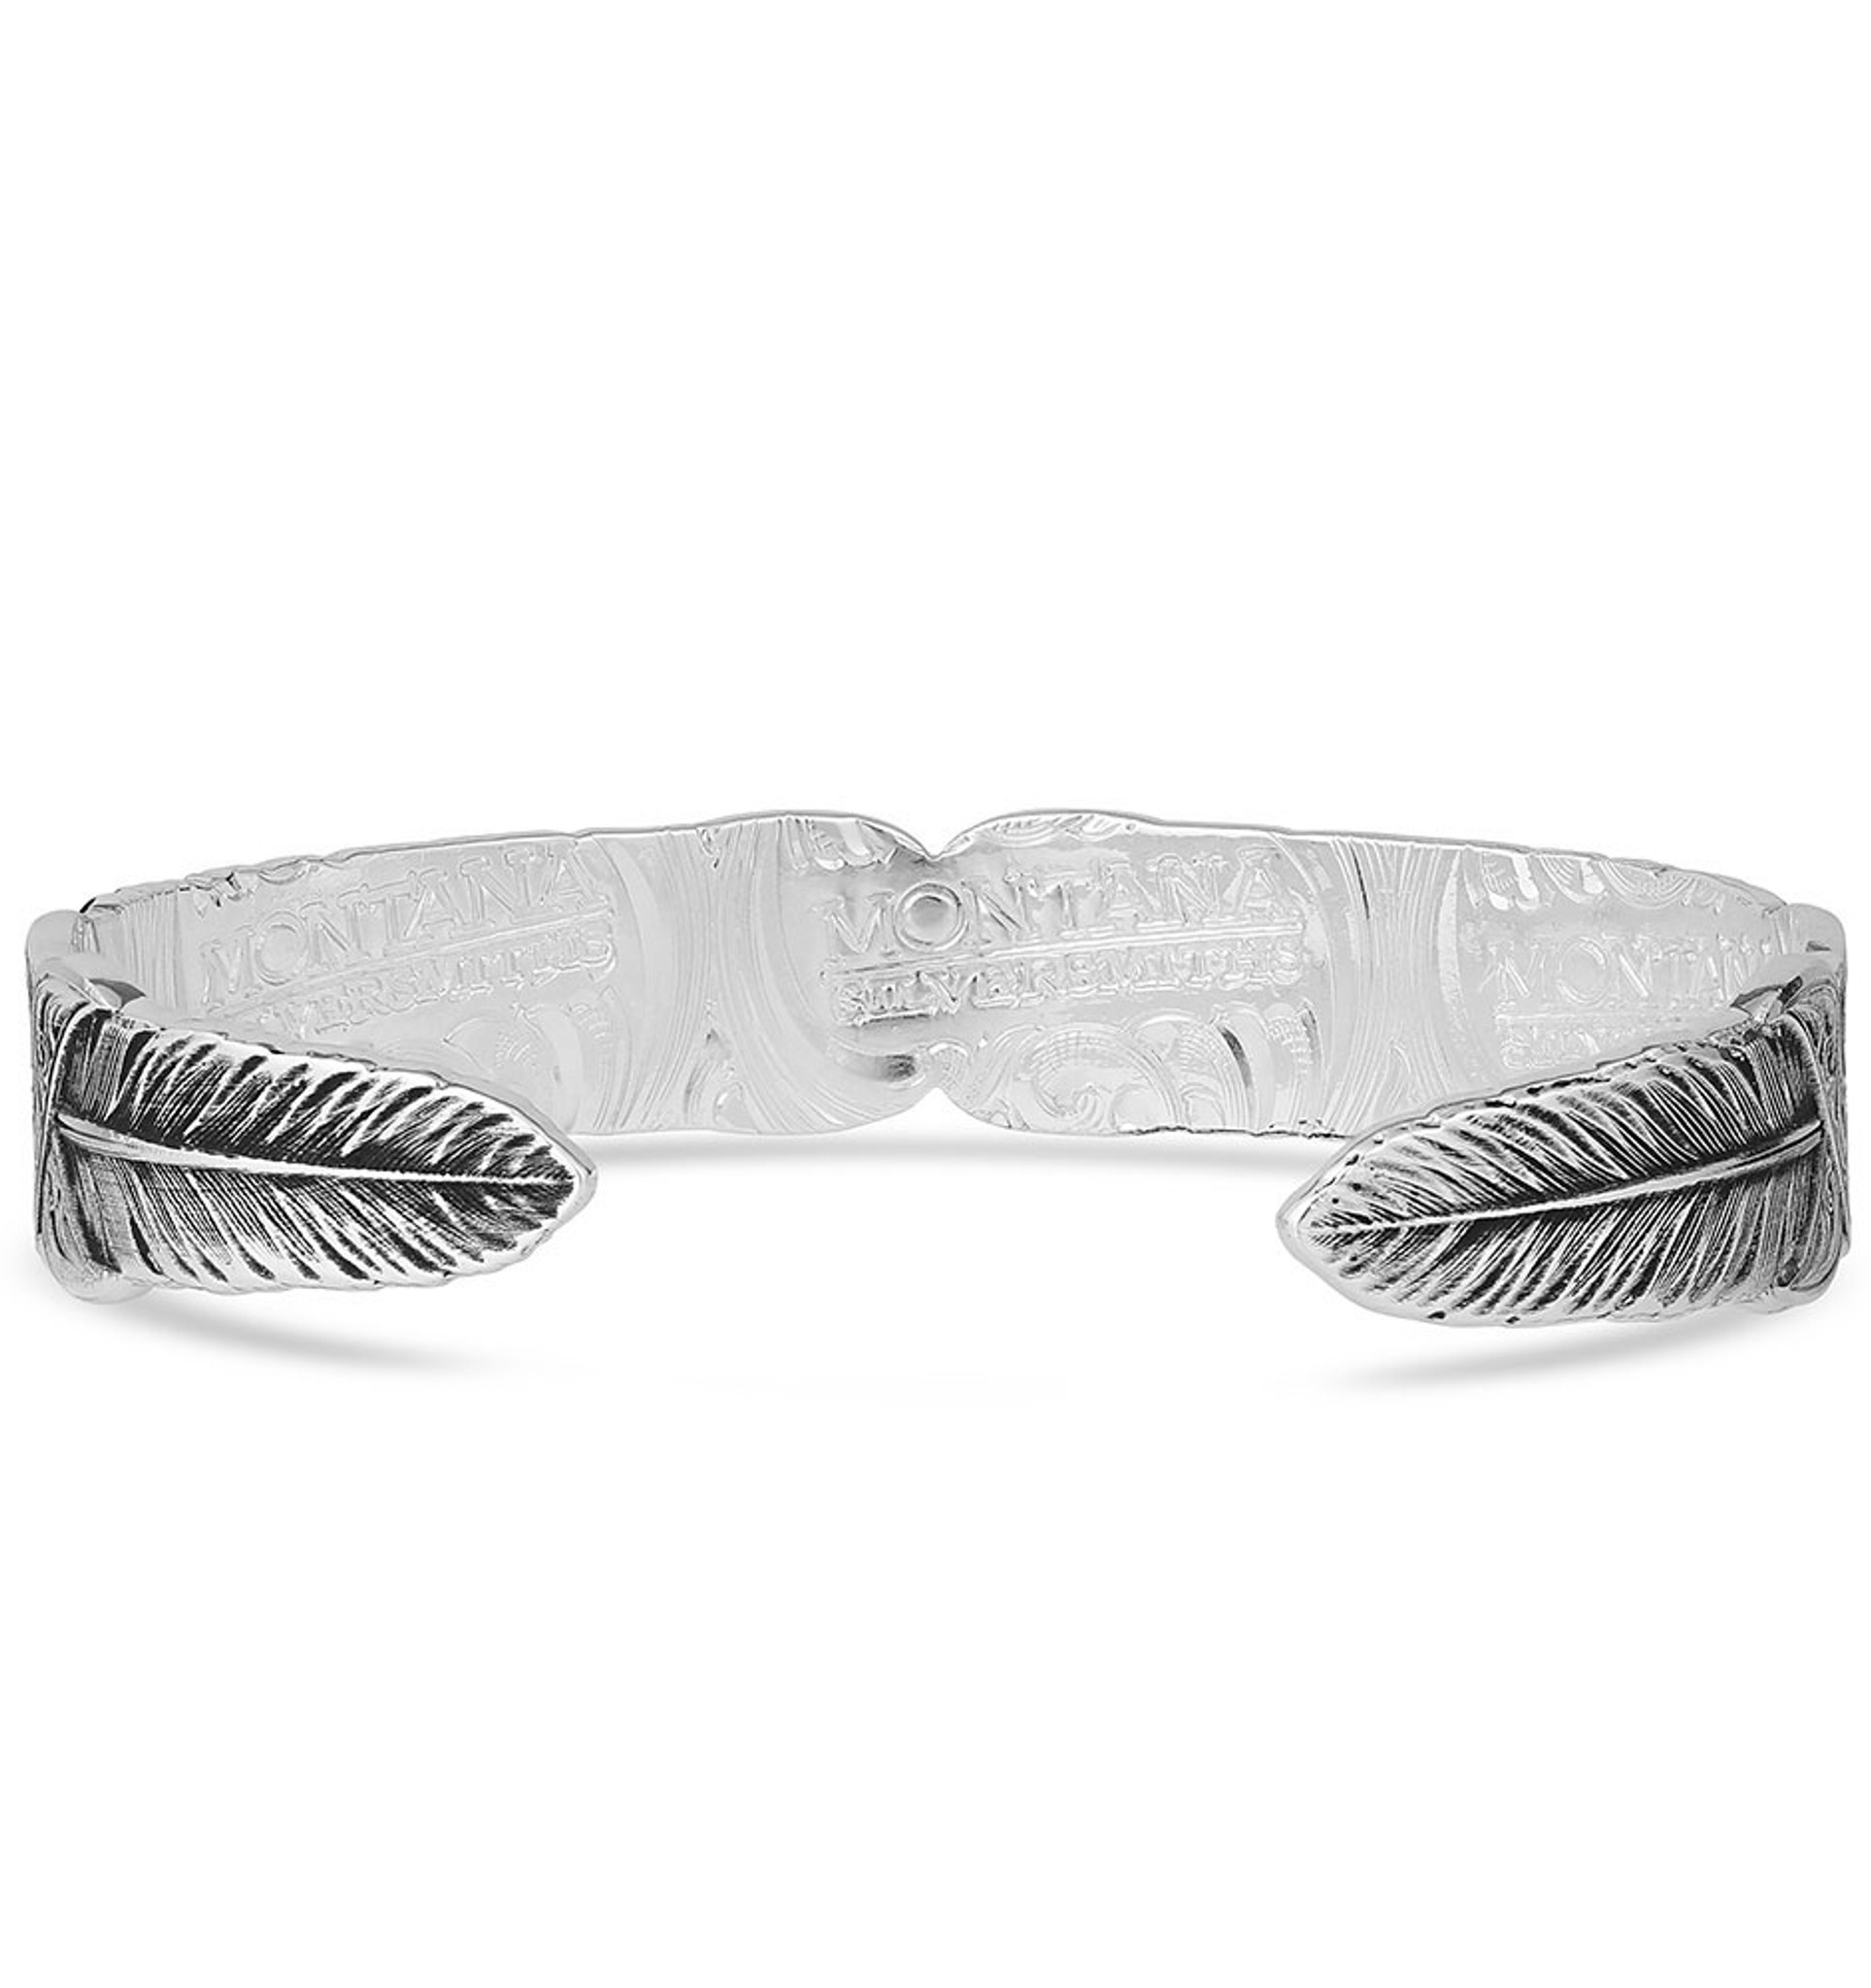 Beccalame Silver Feather Bracelet Lucky Hope Cuff India | Ubuy